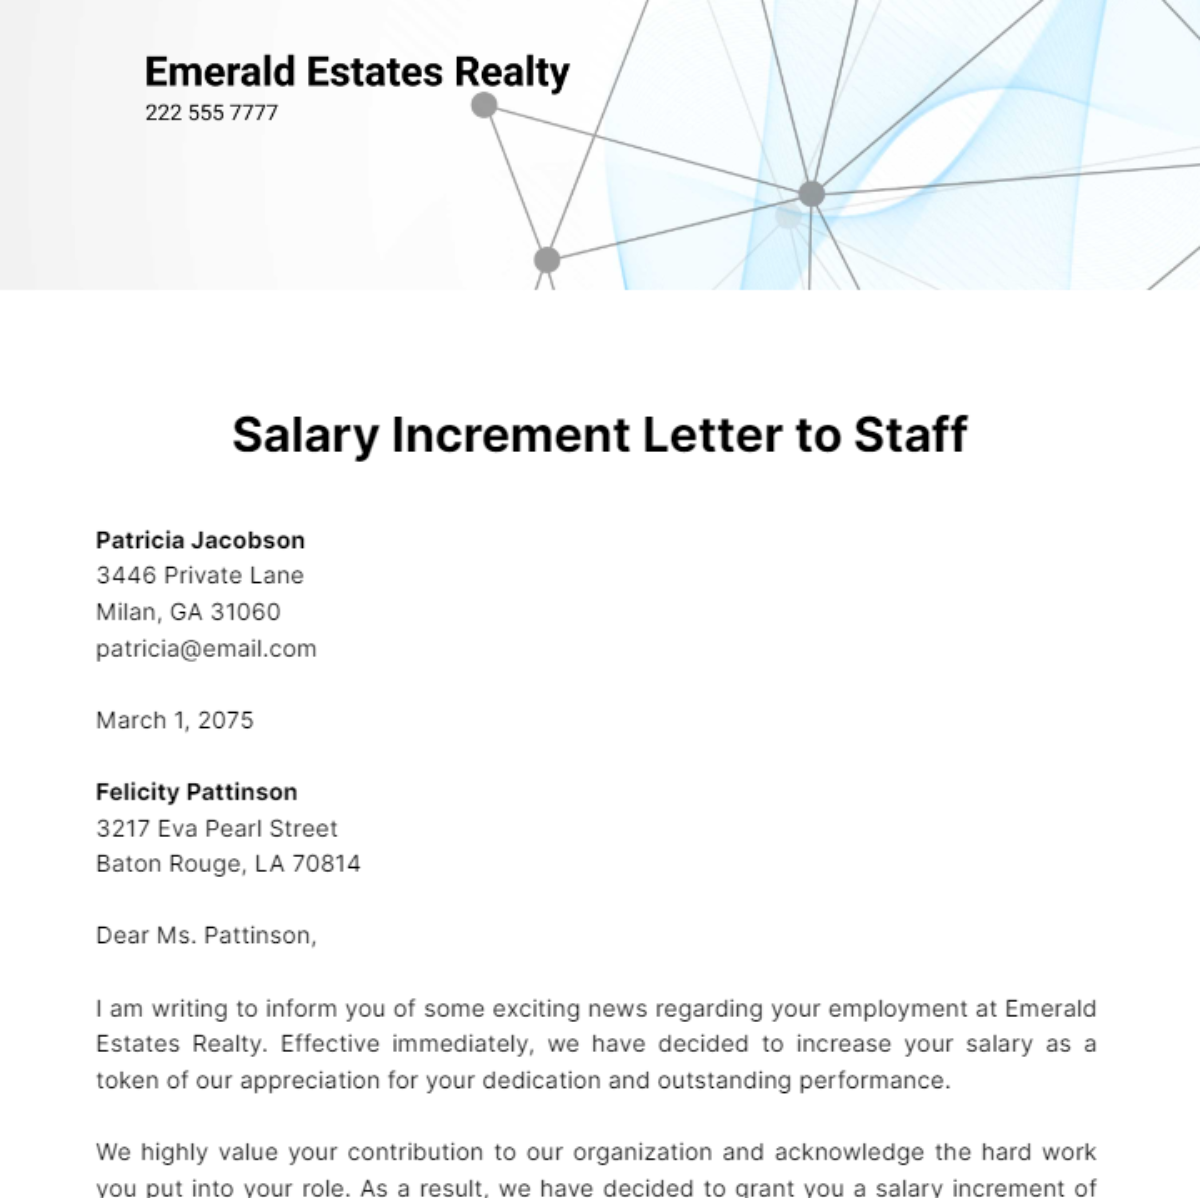 Salary Increment Letter to Staff Template